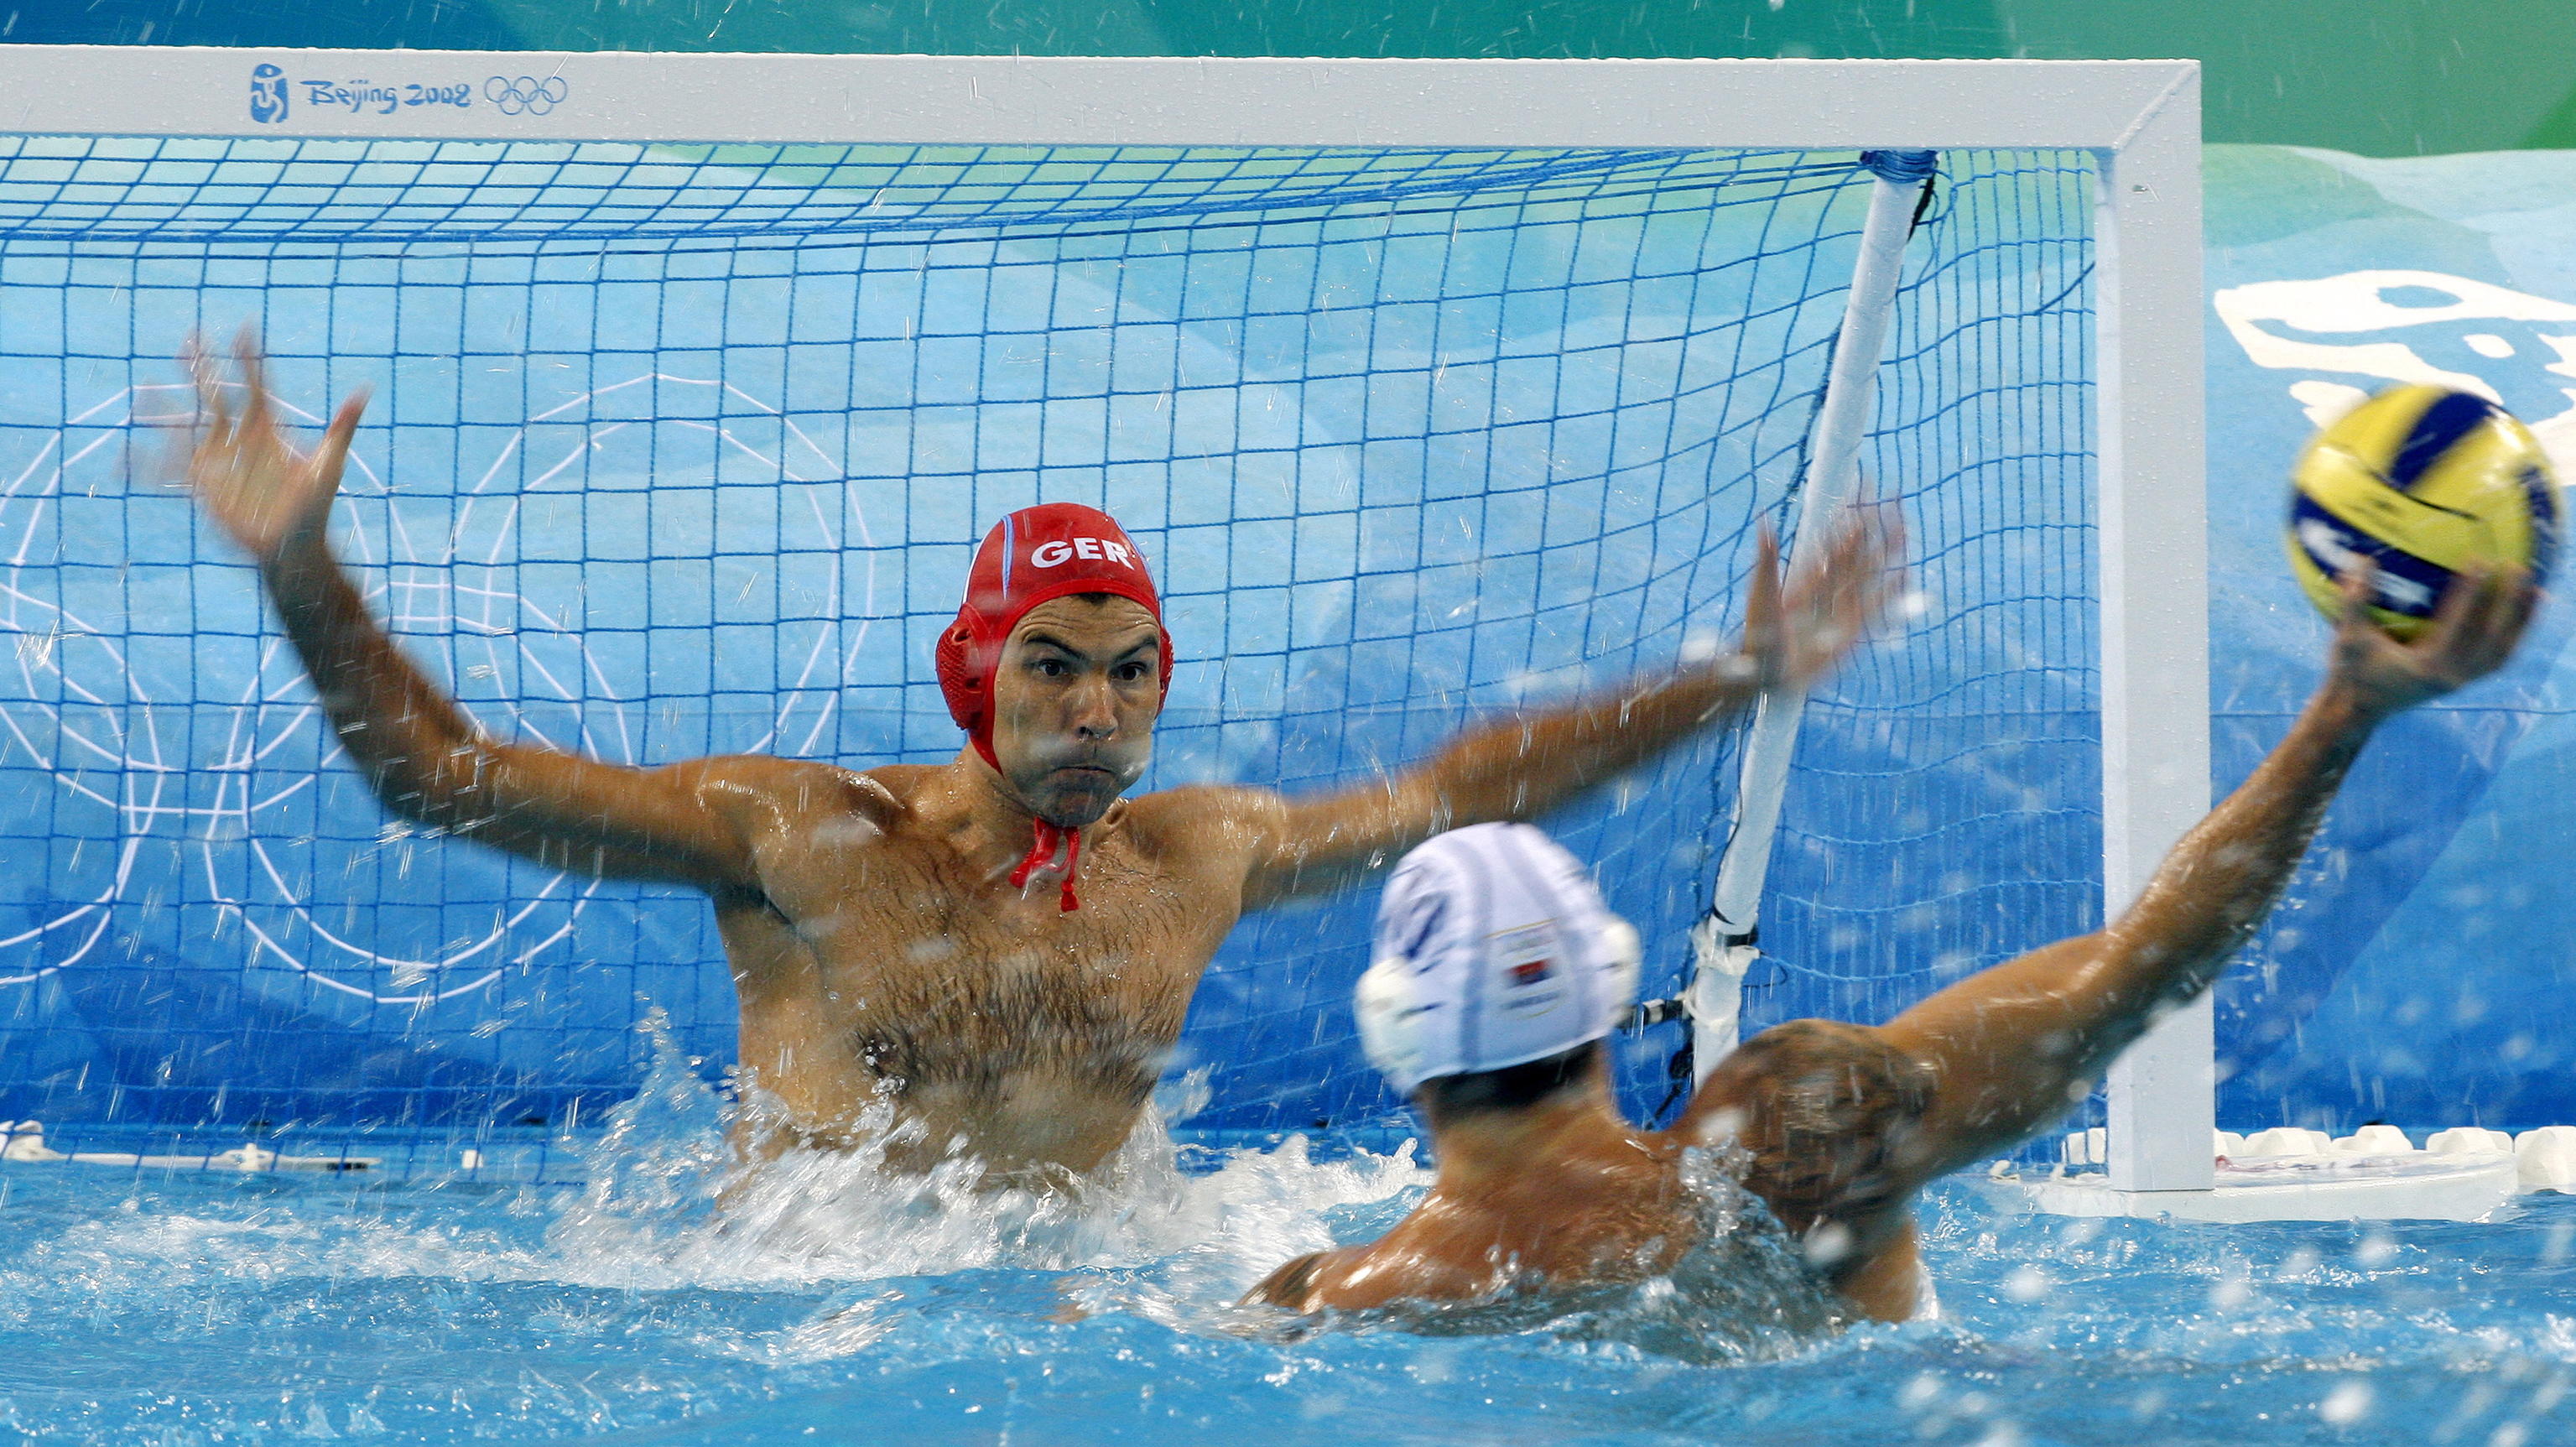 Goalkeeper Alexander Tchigir (L) of Germany vies with Aleksandar Sapic (R) of Serbia during the men's water polo preliminary round group B match 3 between Serbia and Germany competition in the Yingdong Natatorium at the Beijing 2008 Olympic Games, Be